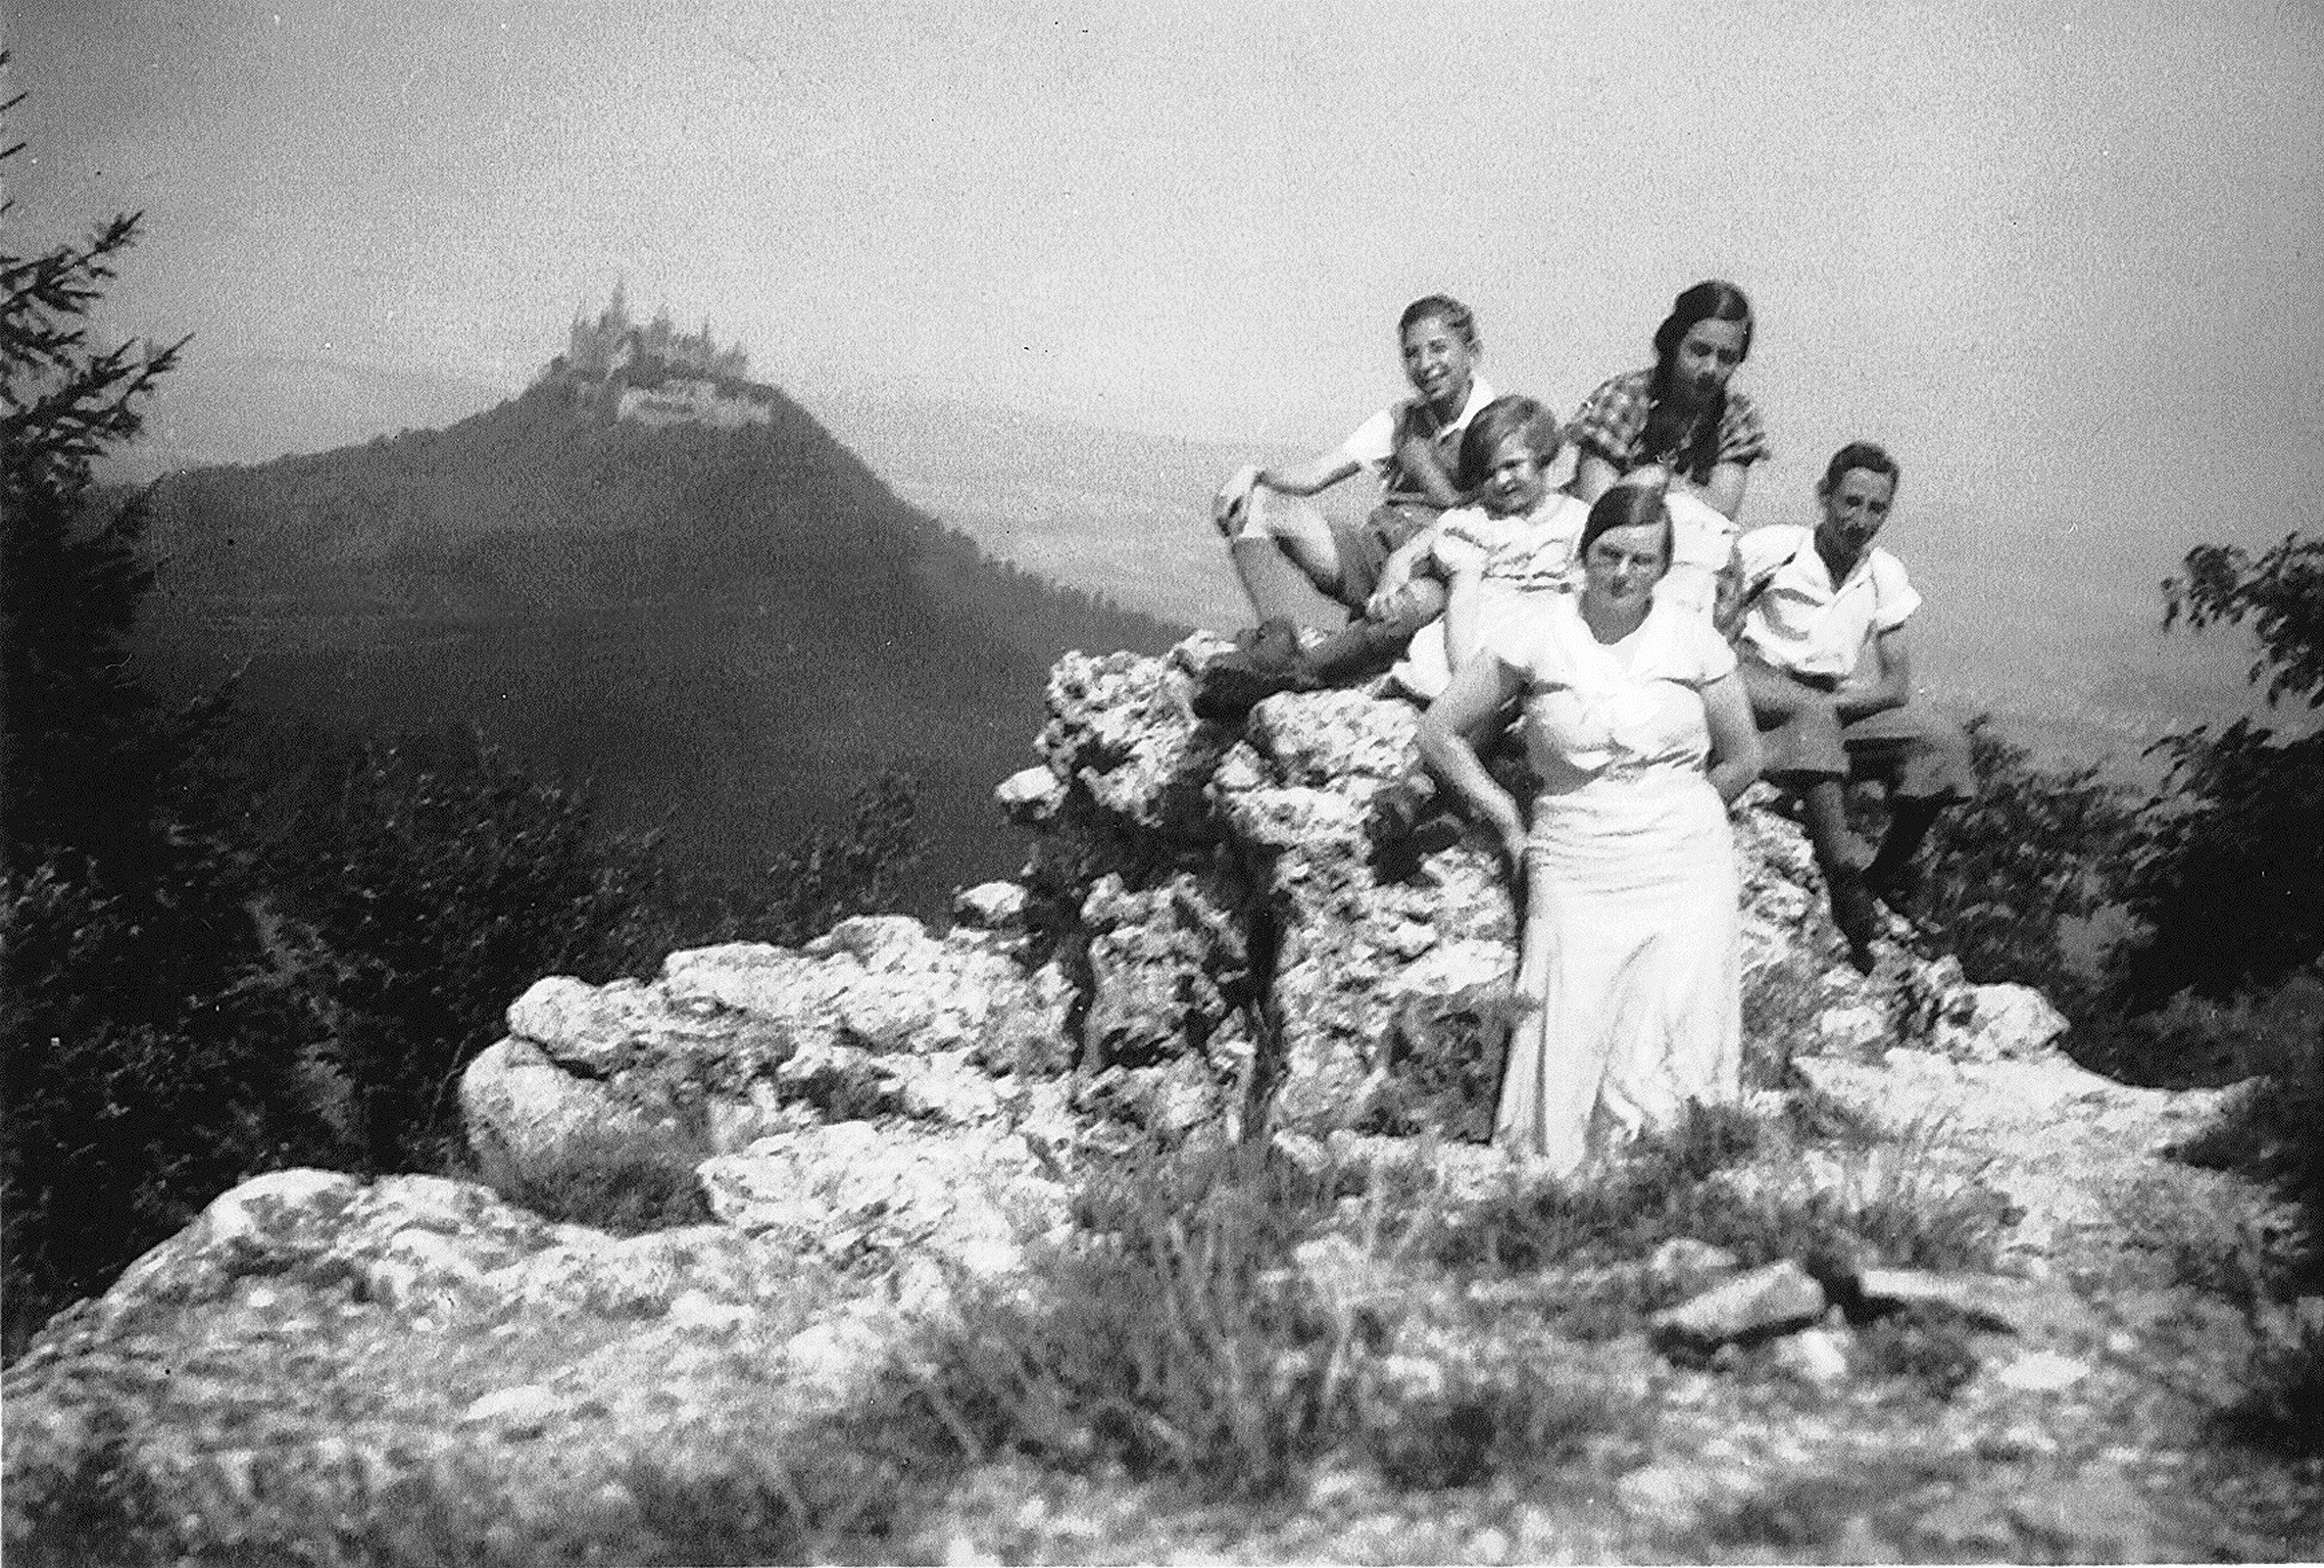 Ruth Schmalzbach (upper center) and friends on the Zeller Horn, 1937, with Castle Hohenzollern in the background.